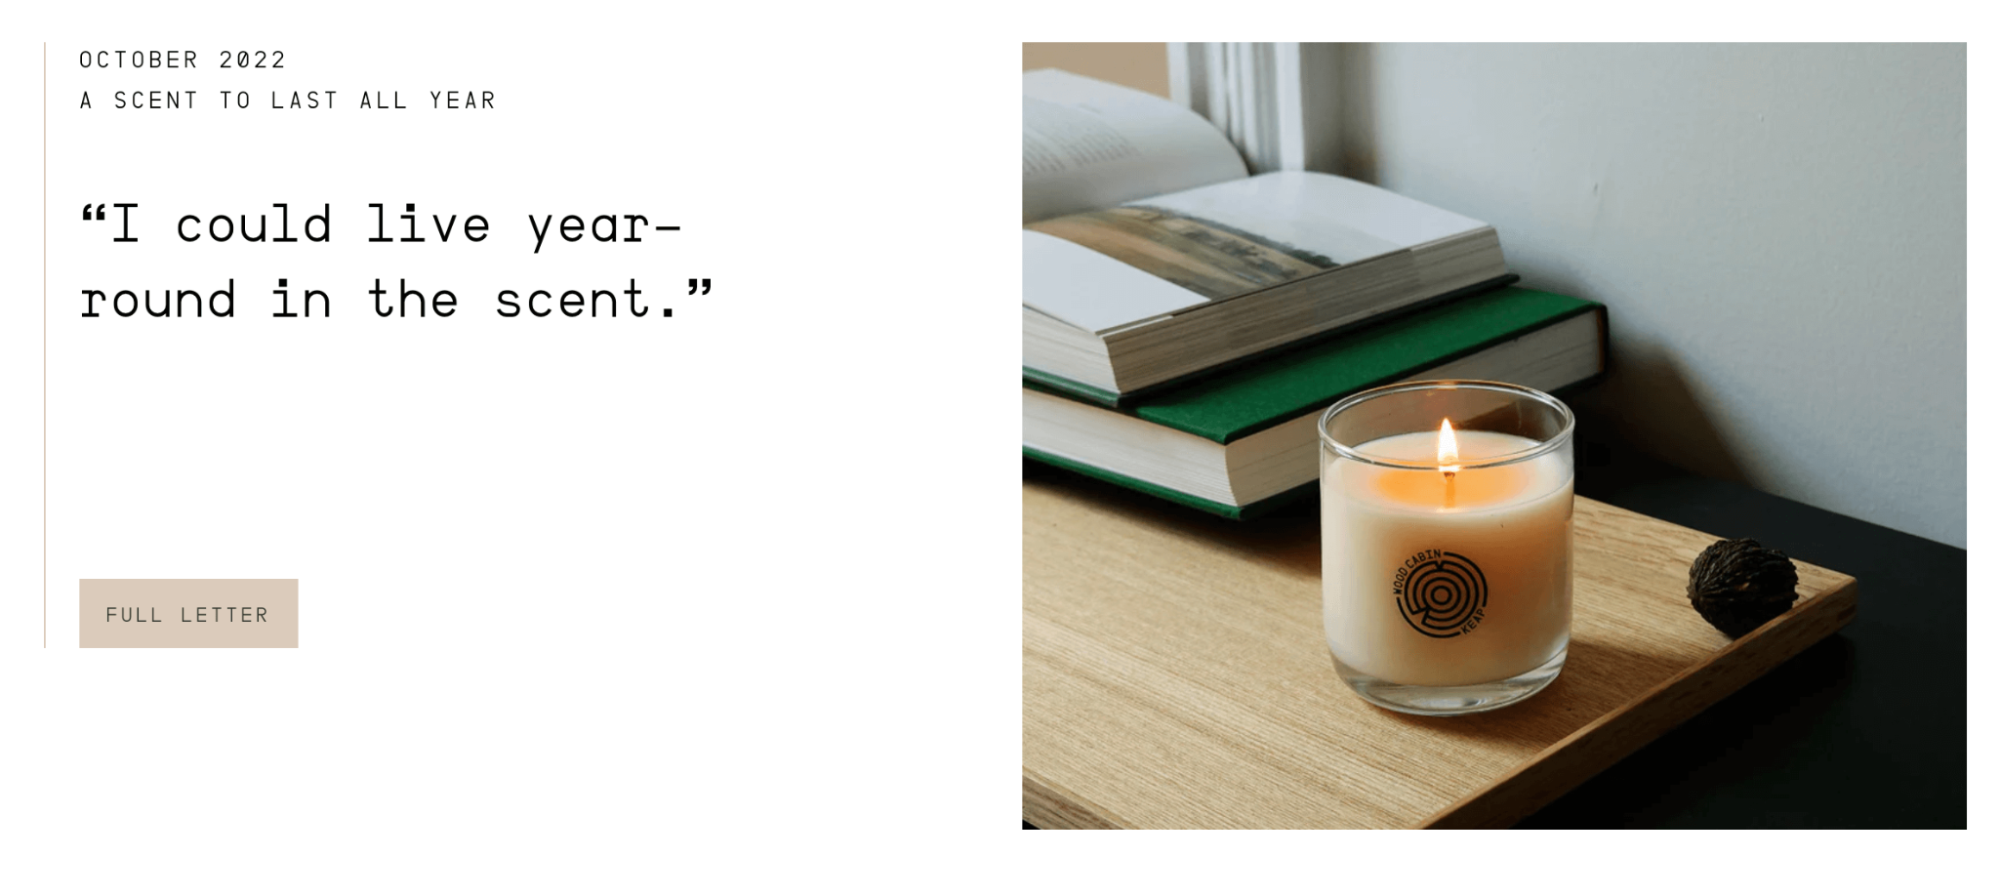 Love letters on their website show how much shoppers enjoy Keap Candles.